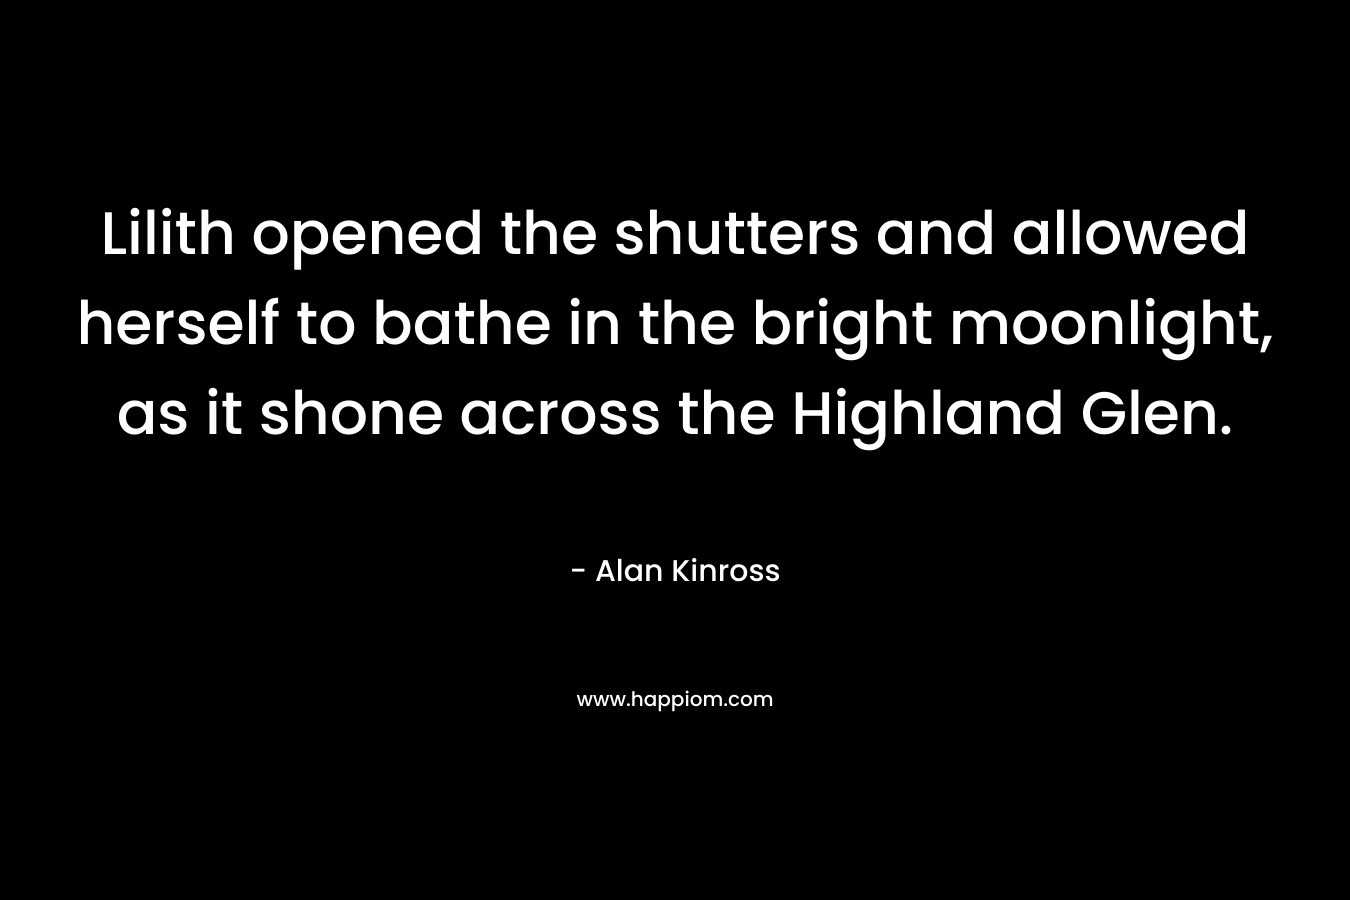 Lilith opened the shutters and allowed herself to bathe in the bright moonlight, as it shone across the Highland Glen. – Alan Kinross